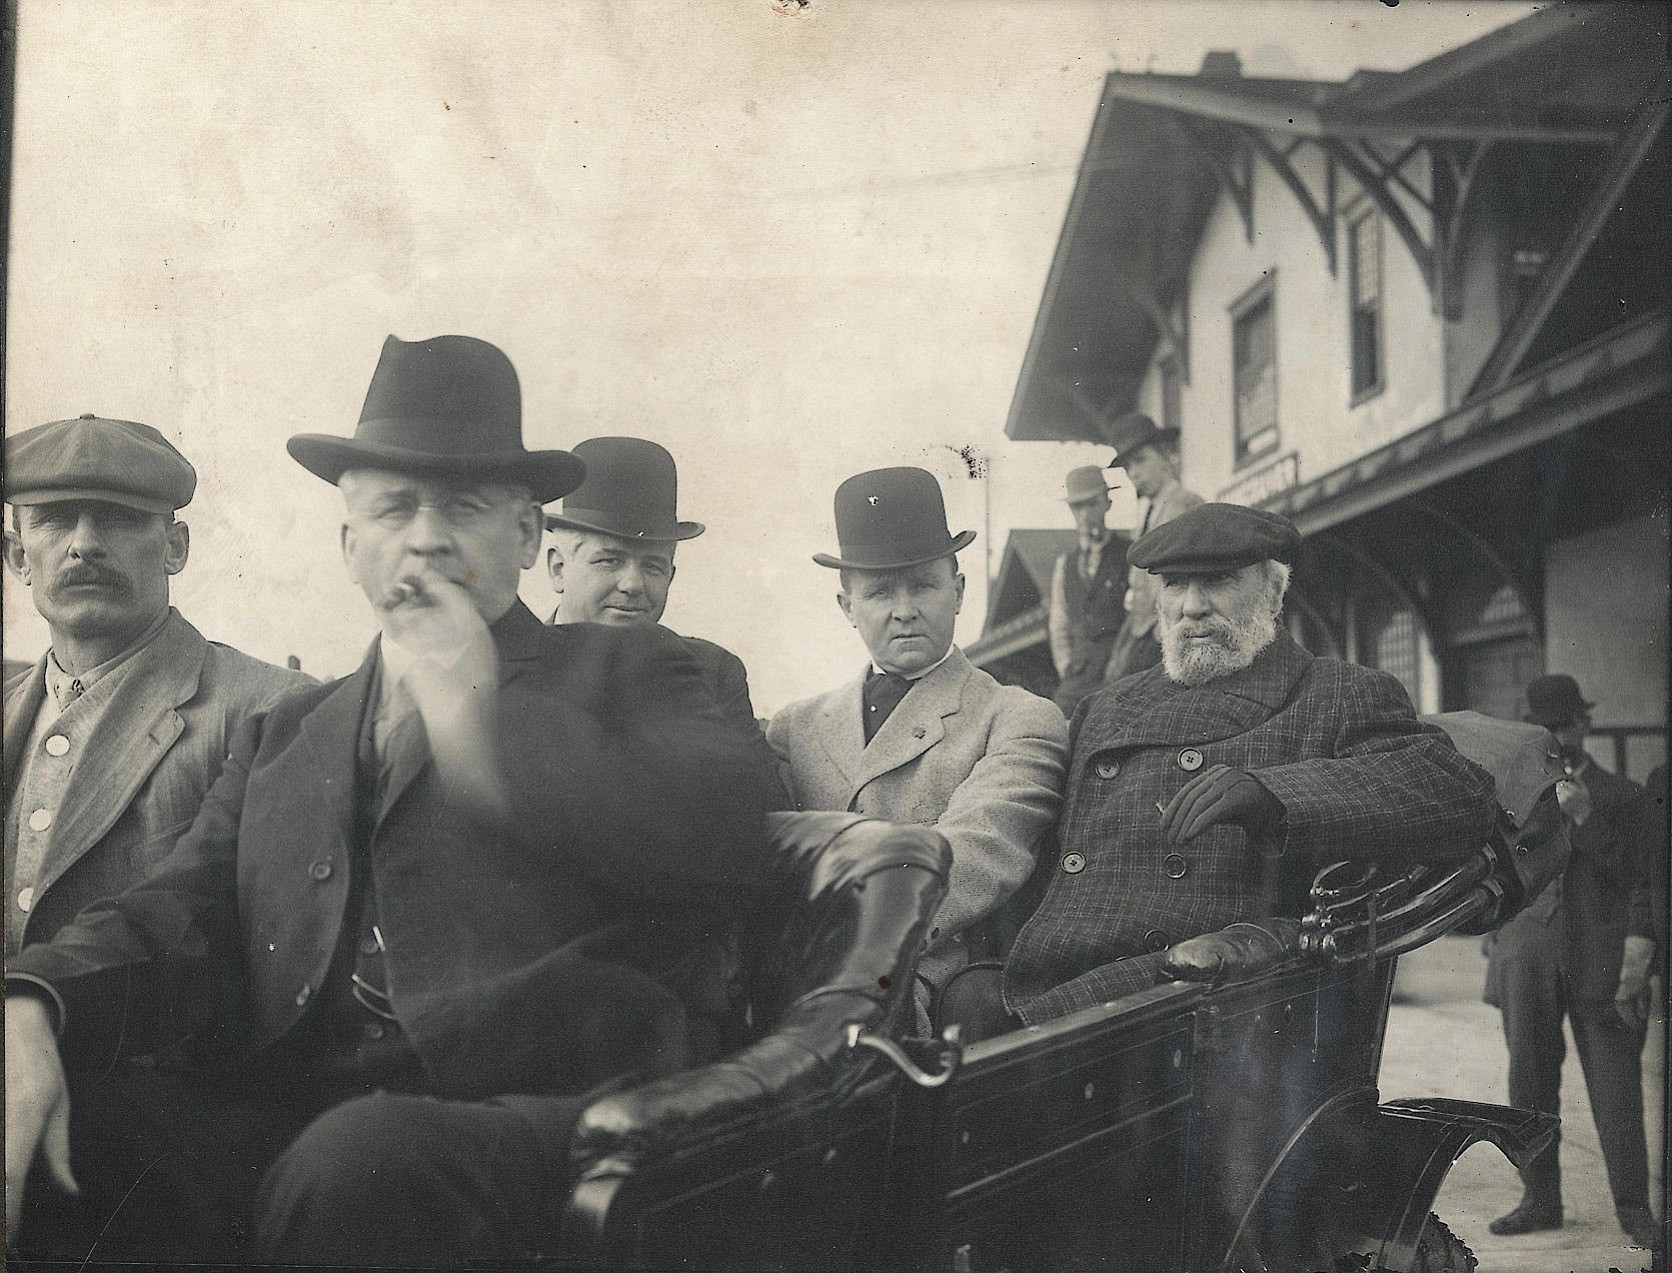 Vancouver Mayor John Kiggins, in center of the back seat, welcomed Great Northern Railway tycoon James J. Hill, with beard, during a visit. The photo was shot on Oct. 4, 1911, at Vancouver's railroad depot.